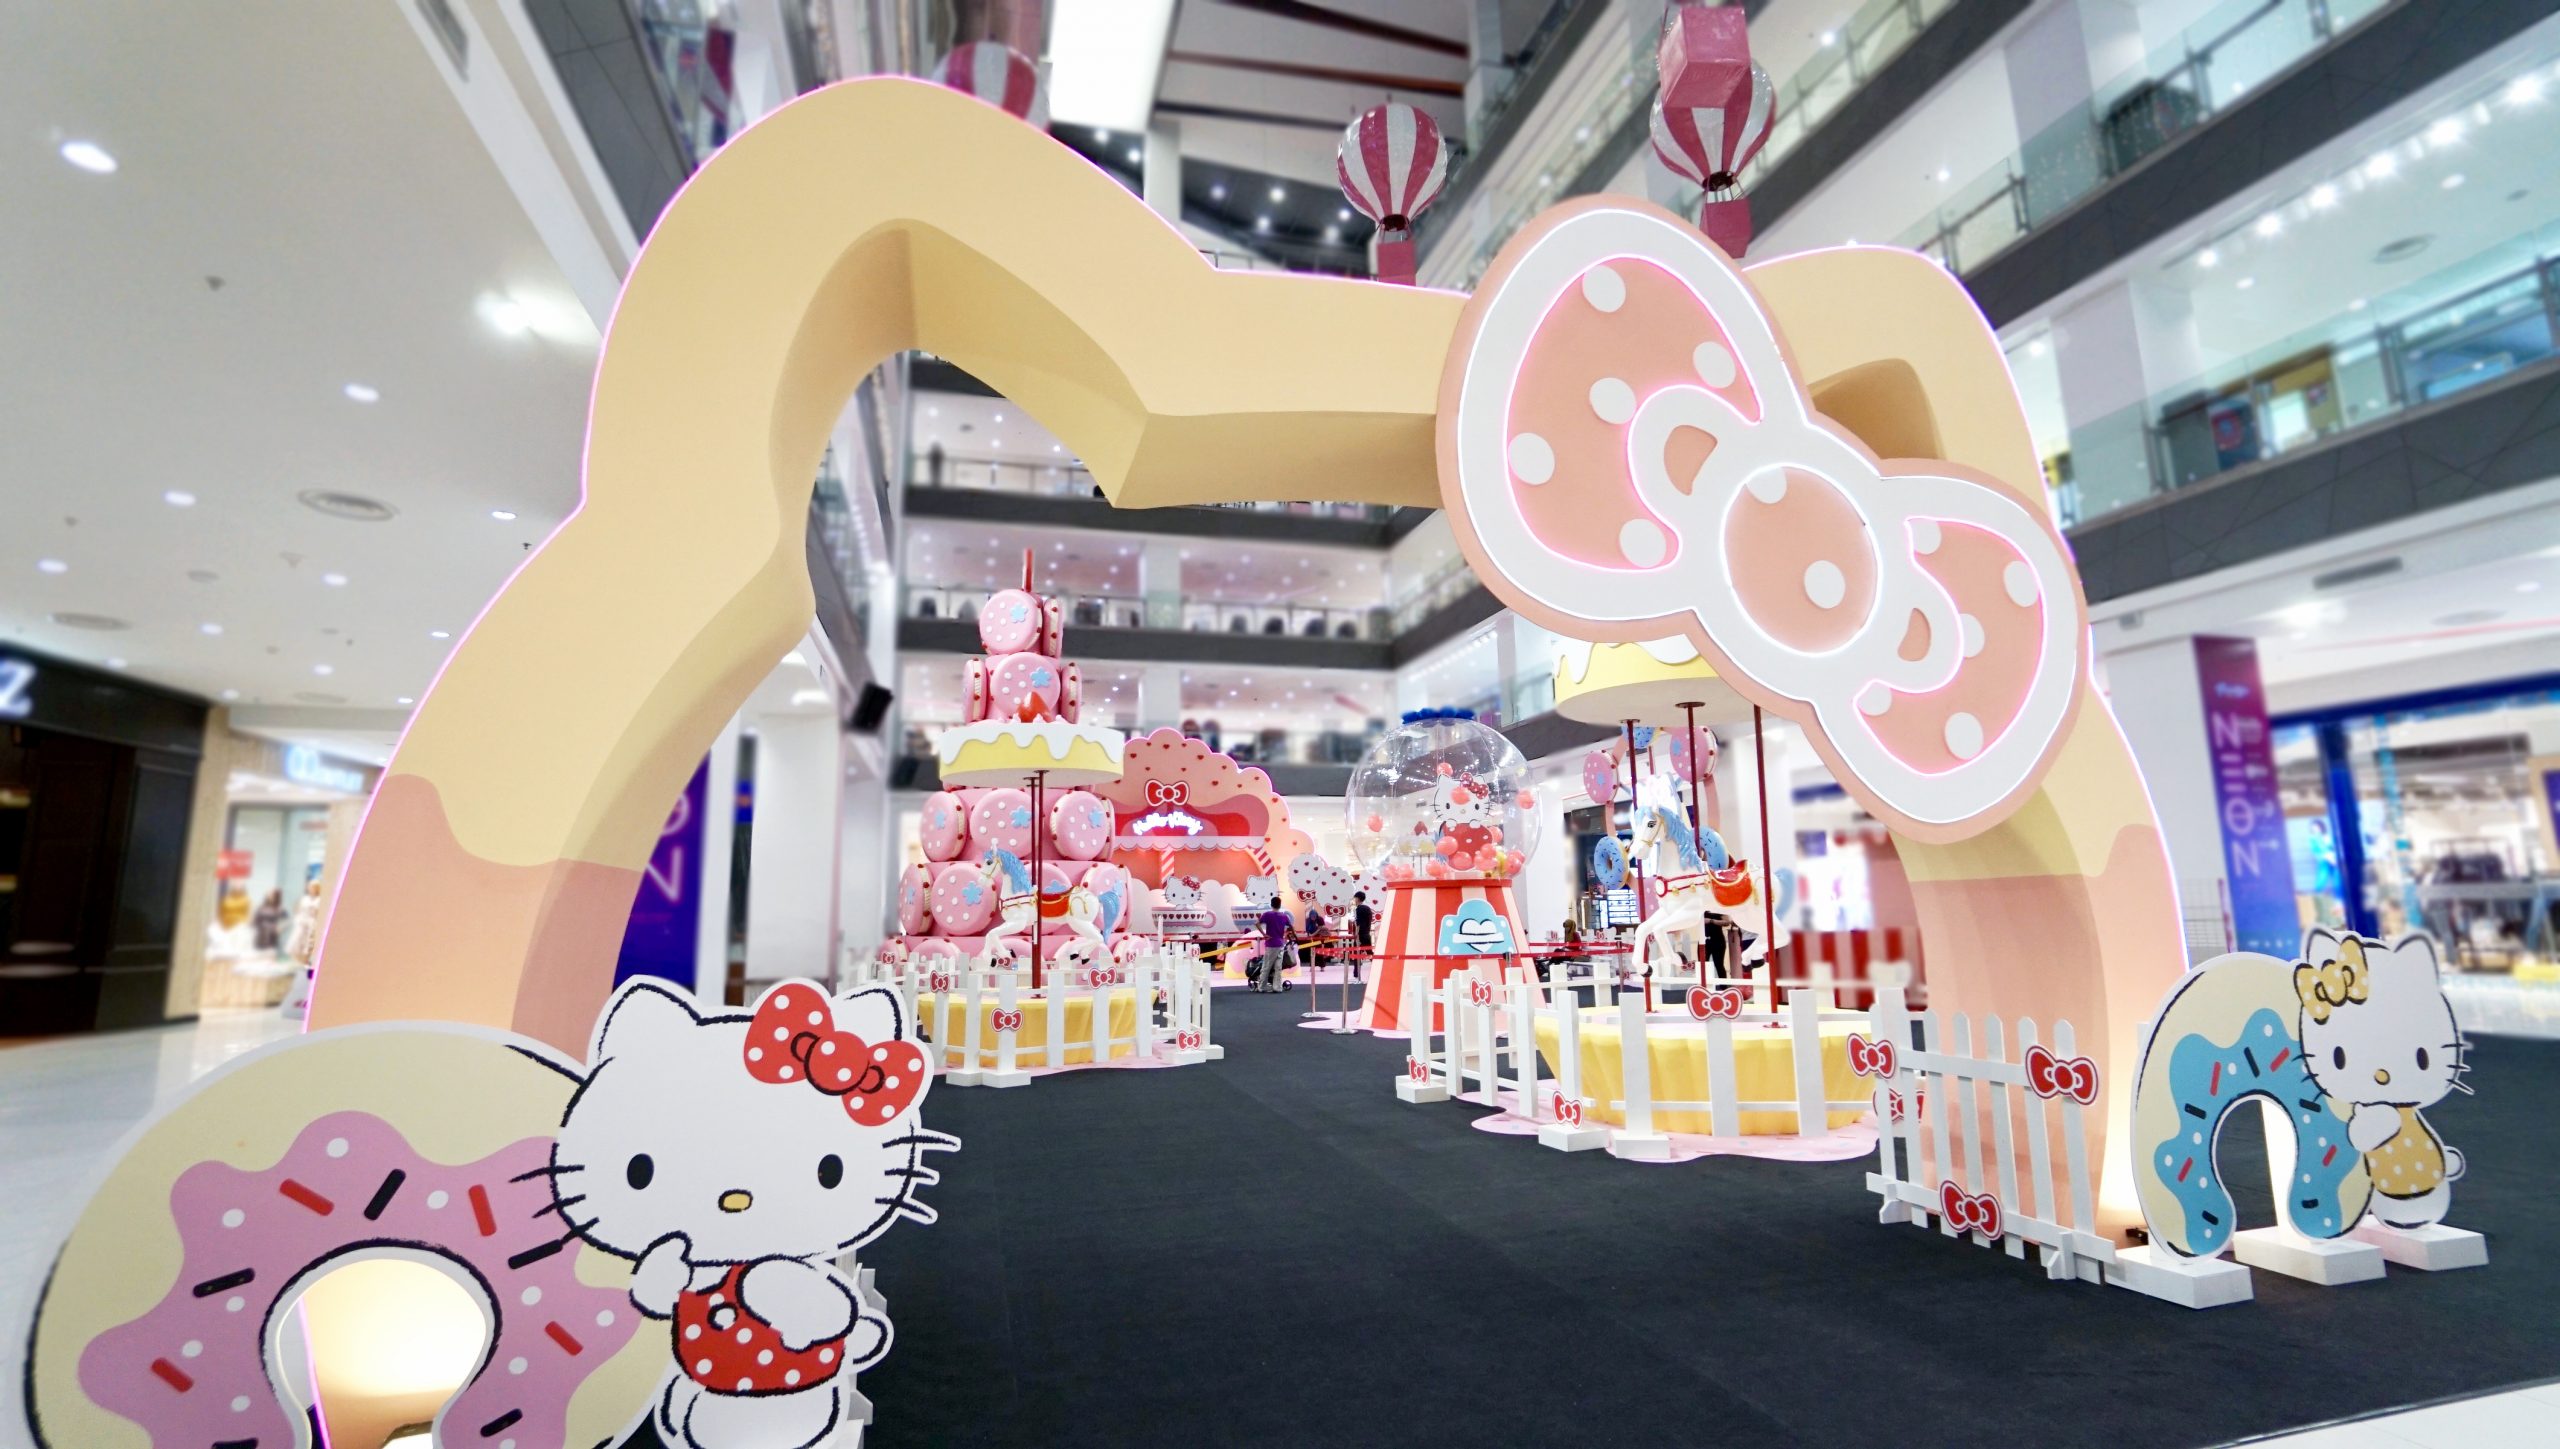 Explore the sweet and enchanting world of Hello Kitty at Paradigm Mall Johor Bahru this March School Holidays!